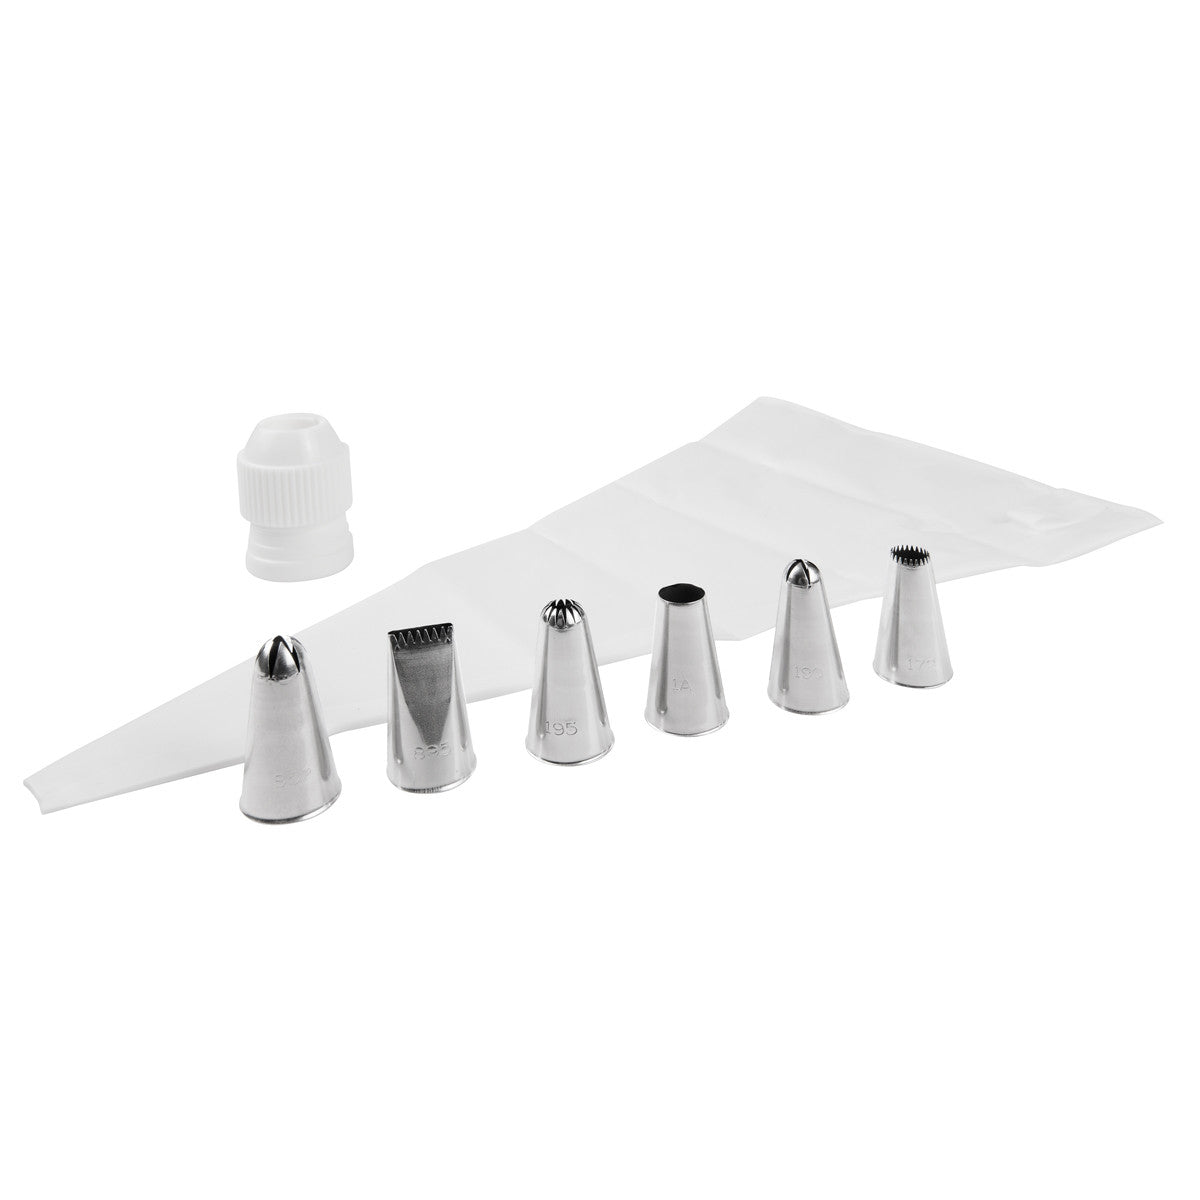 PIPING SET (40 cm PIPING BAG, COUPLER, 6 NOZZLES STAINLESS STEEL)